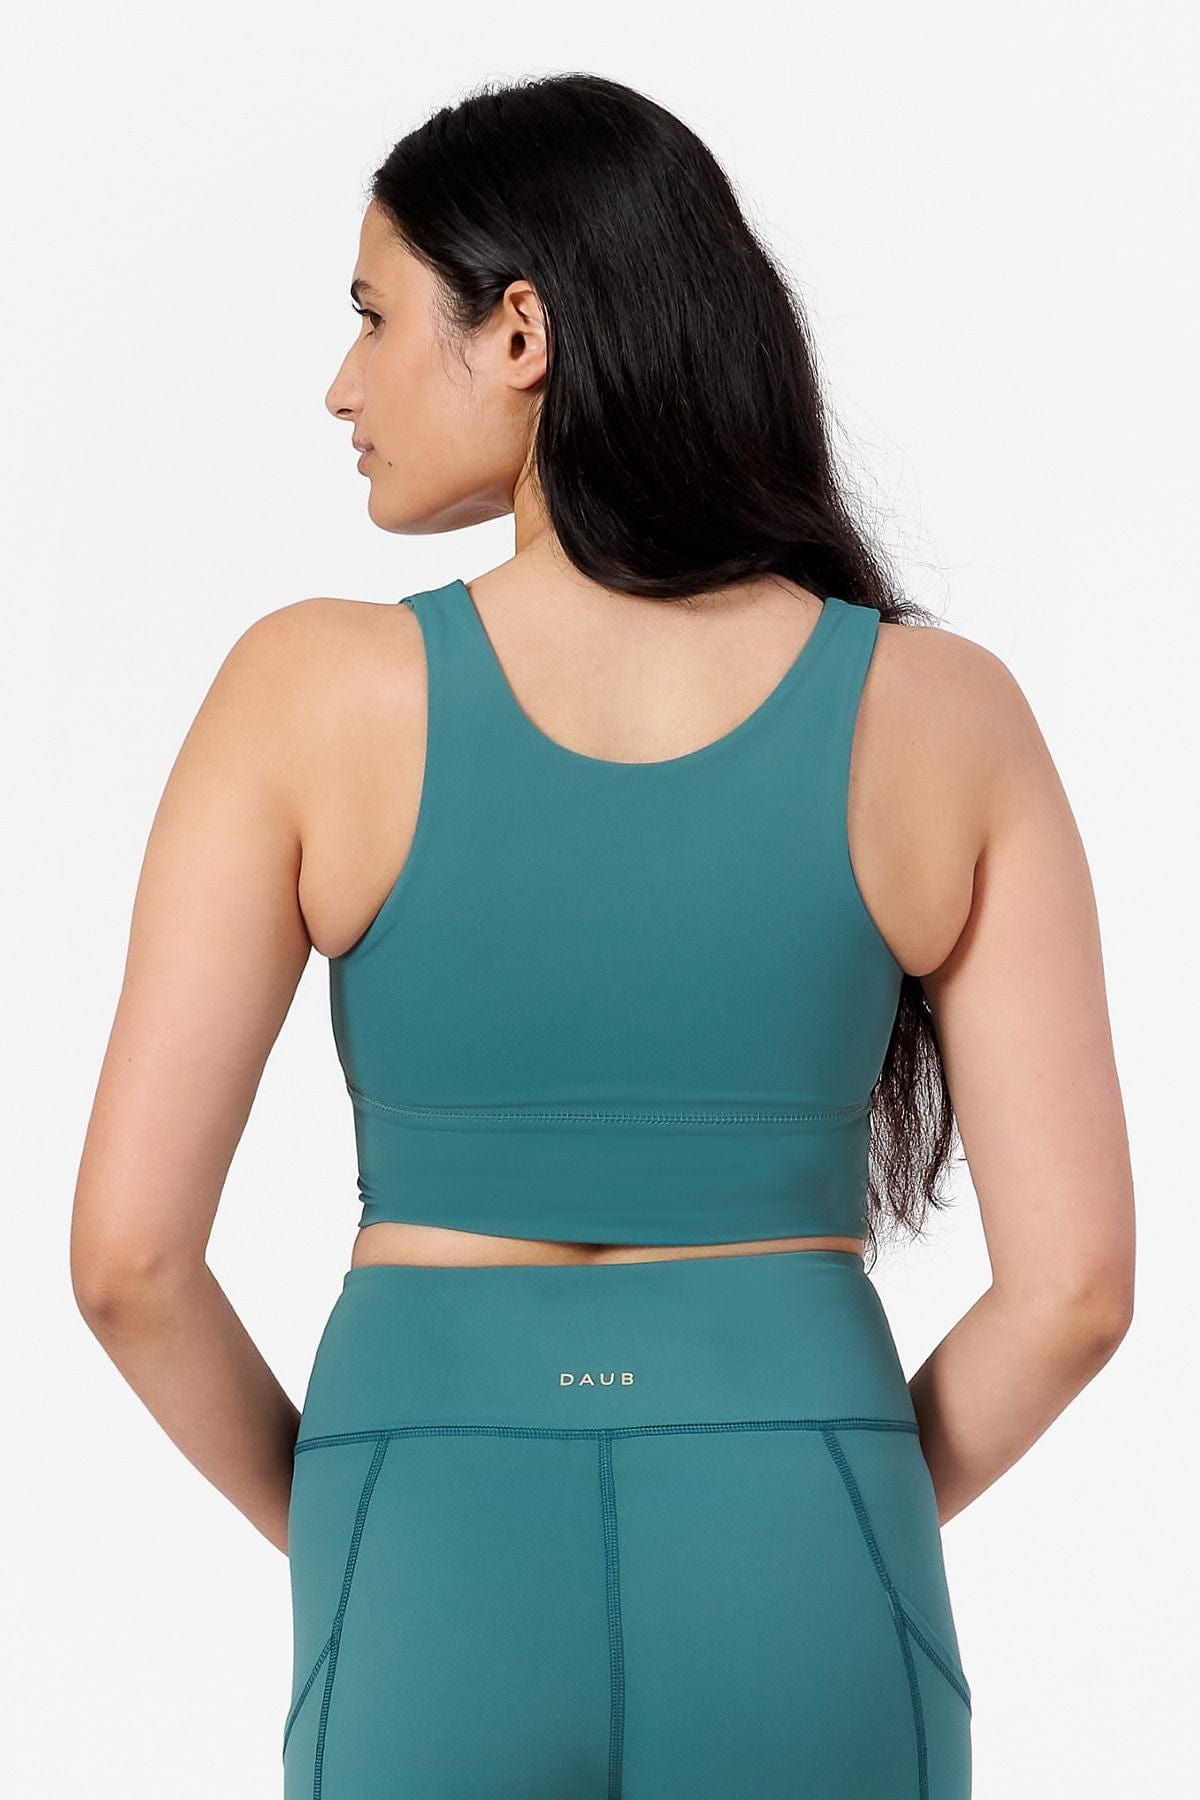 a woman wearing a teal high neck crop top with matching teal shorts